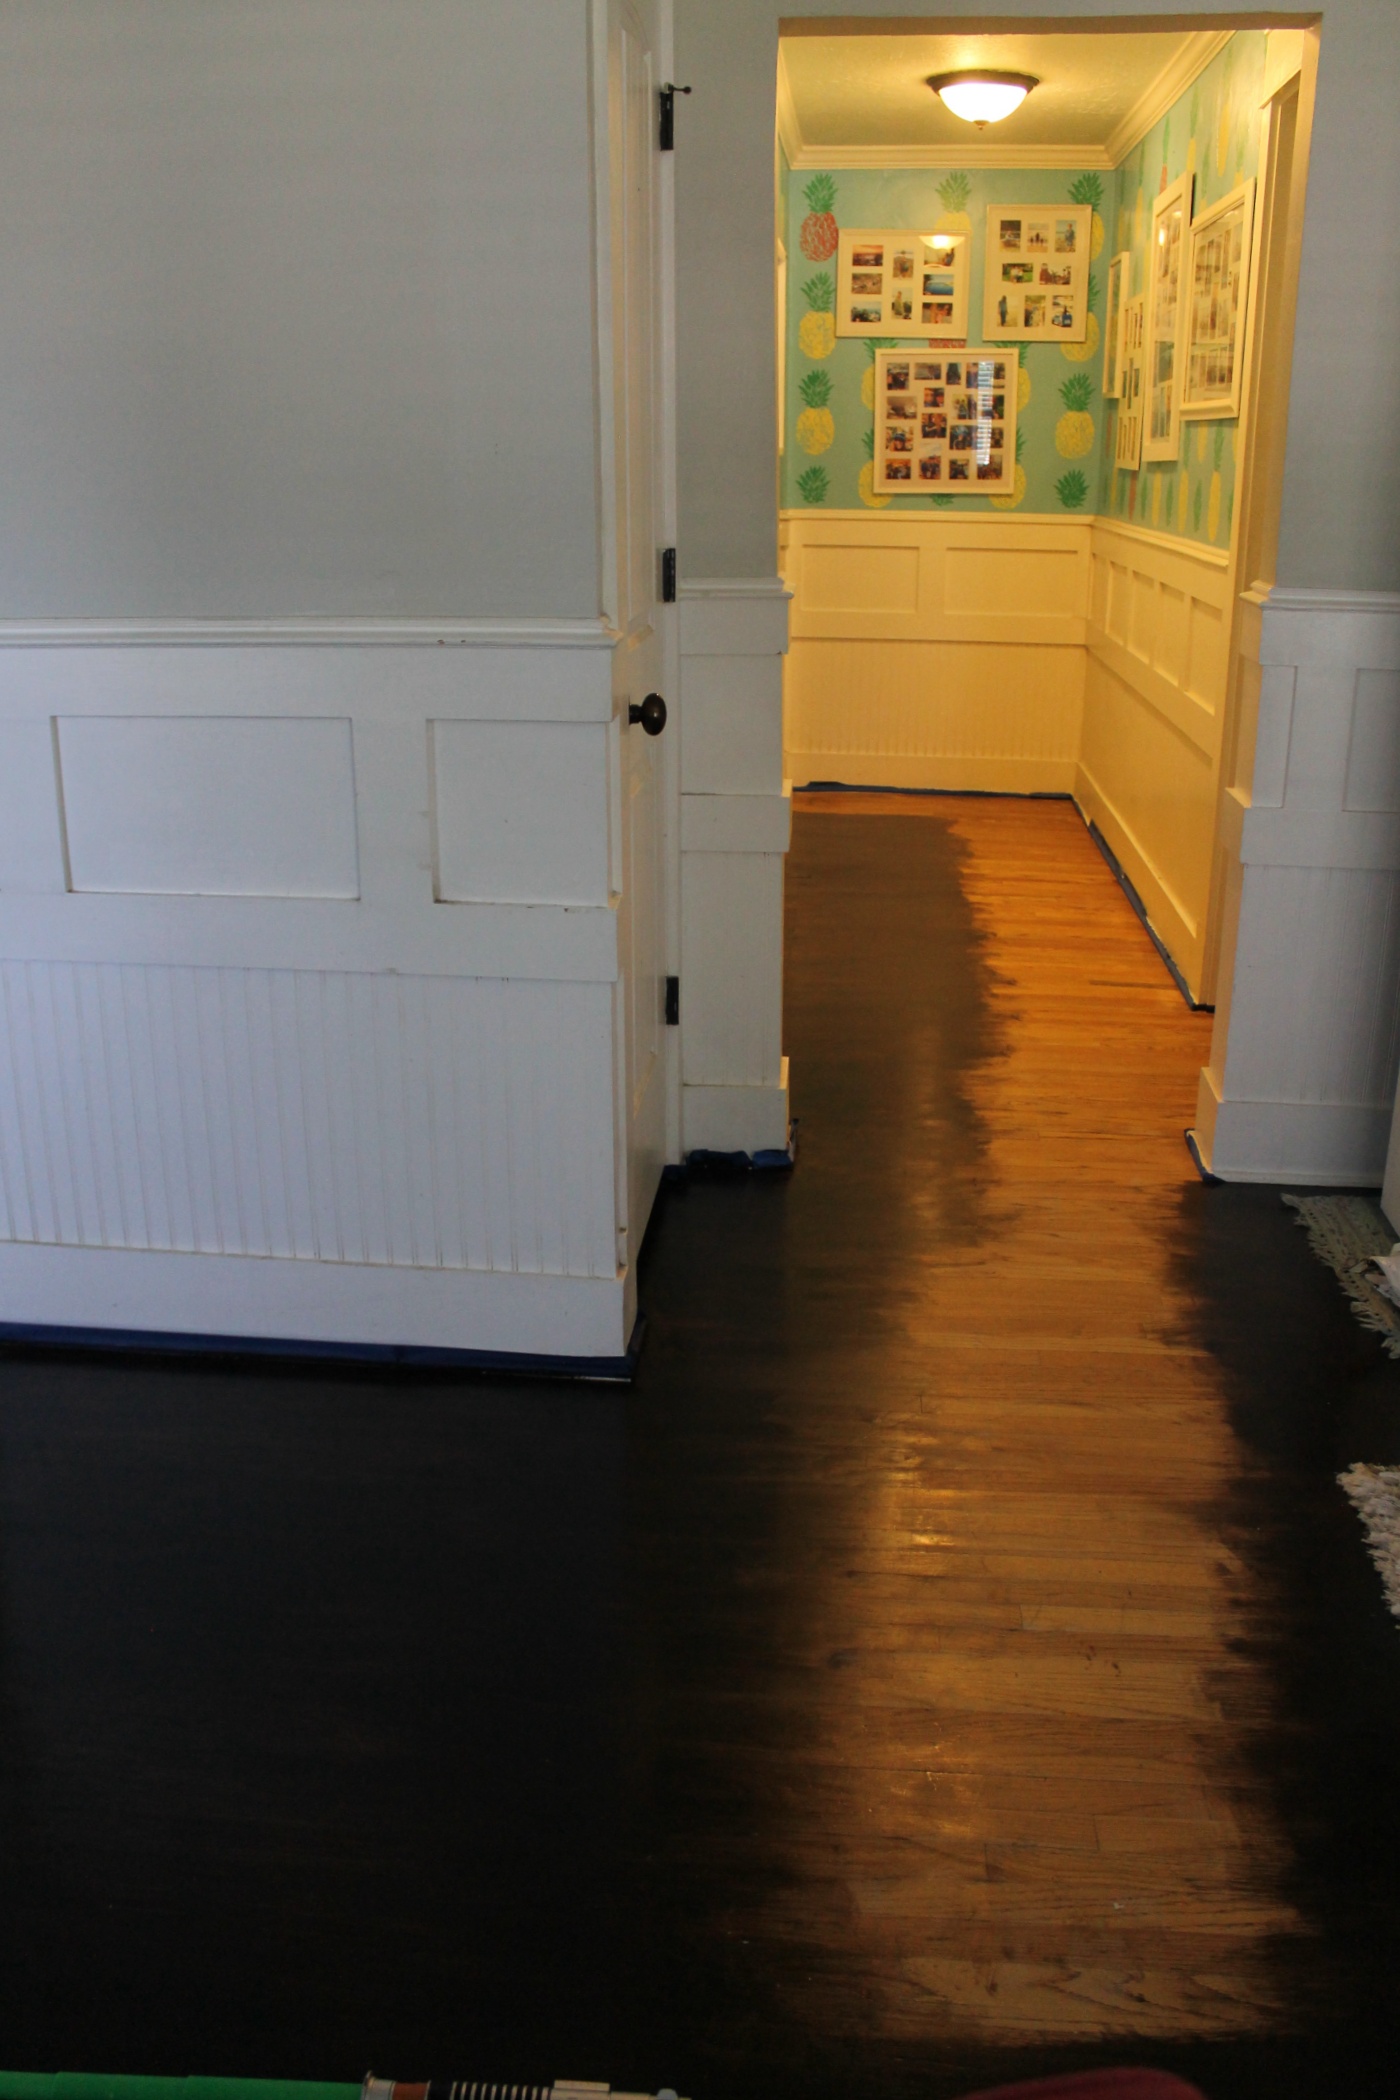 How I Gel Stained our Wood Floors - The Wicker House